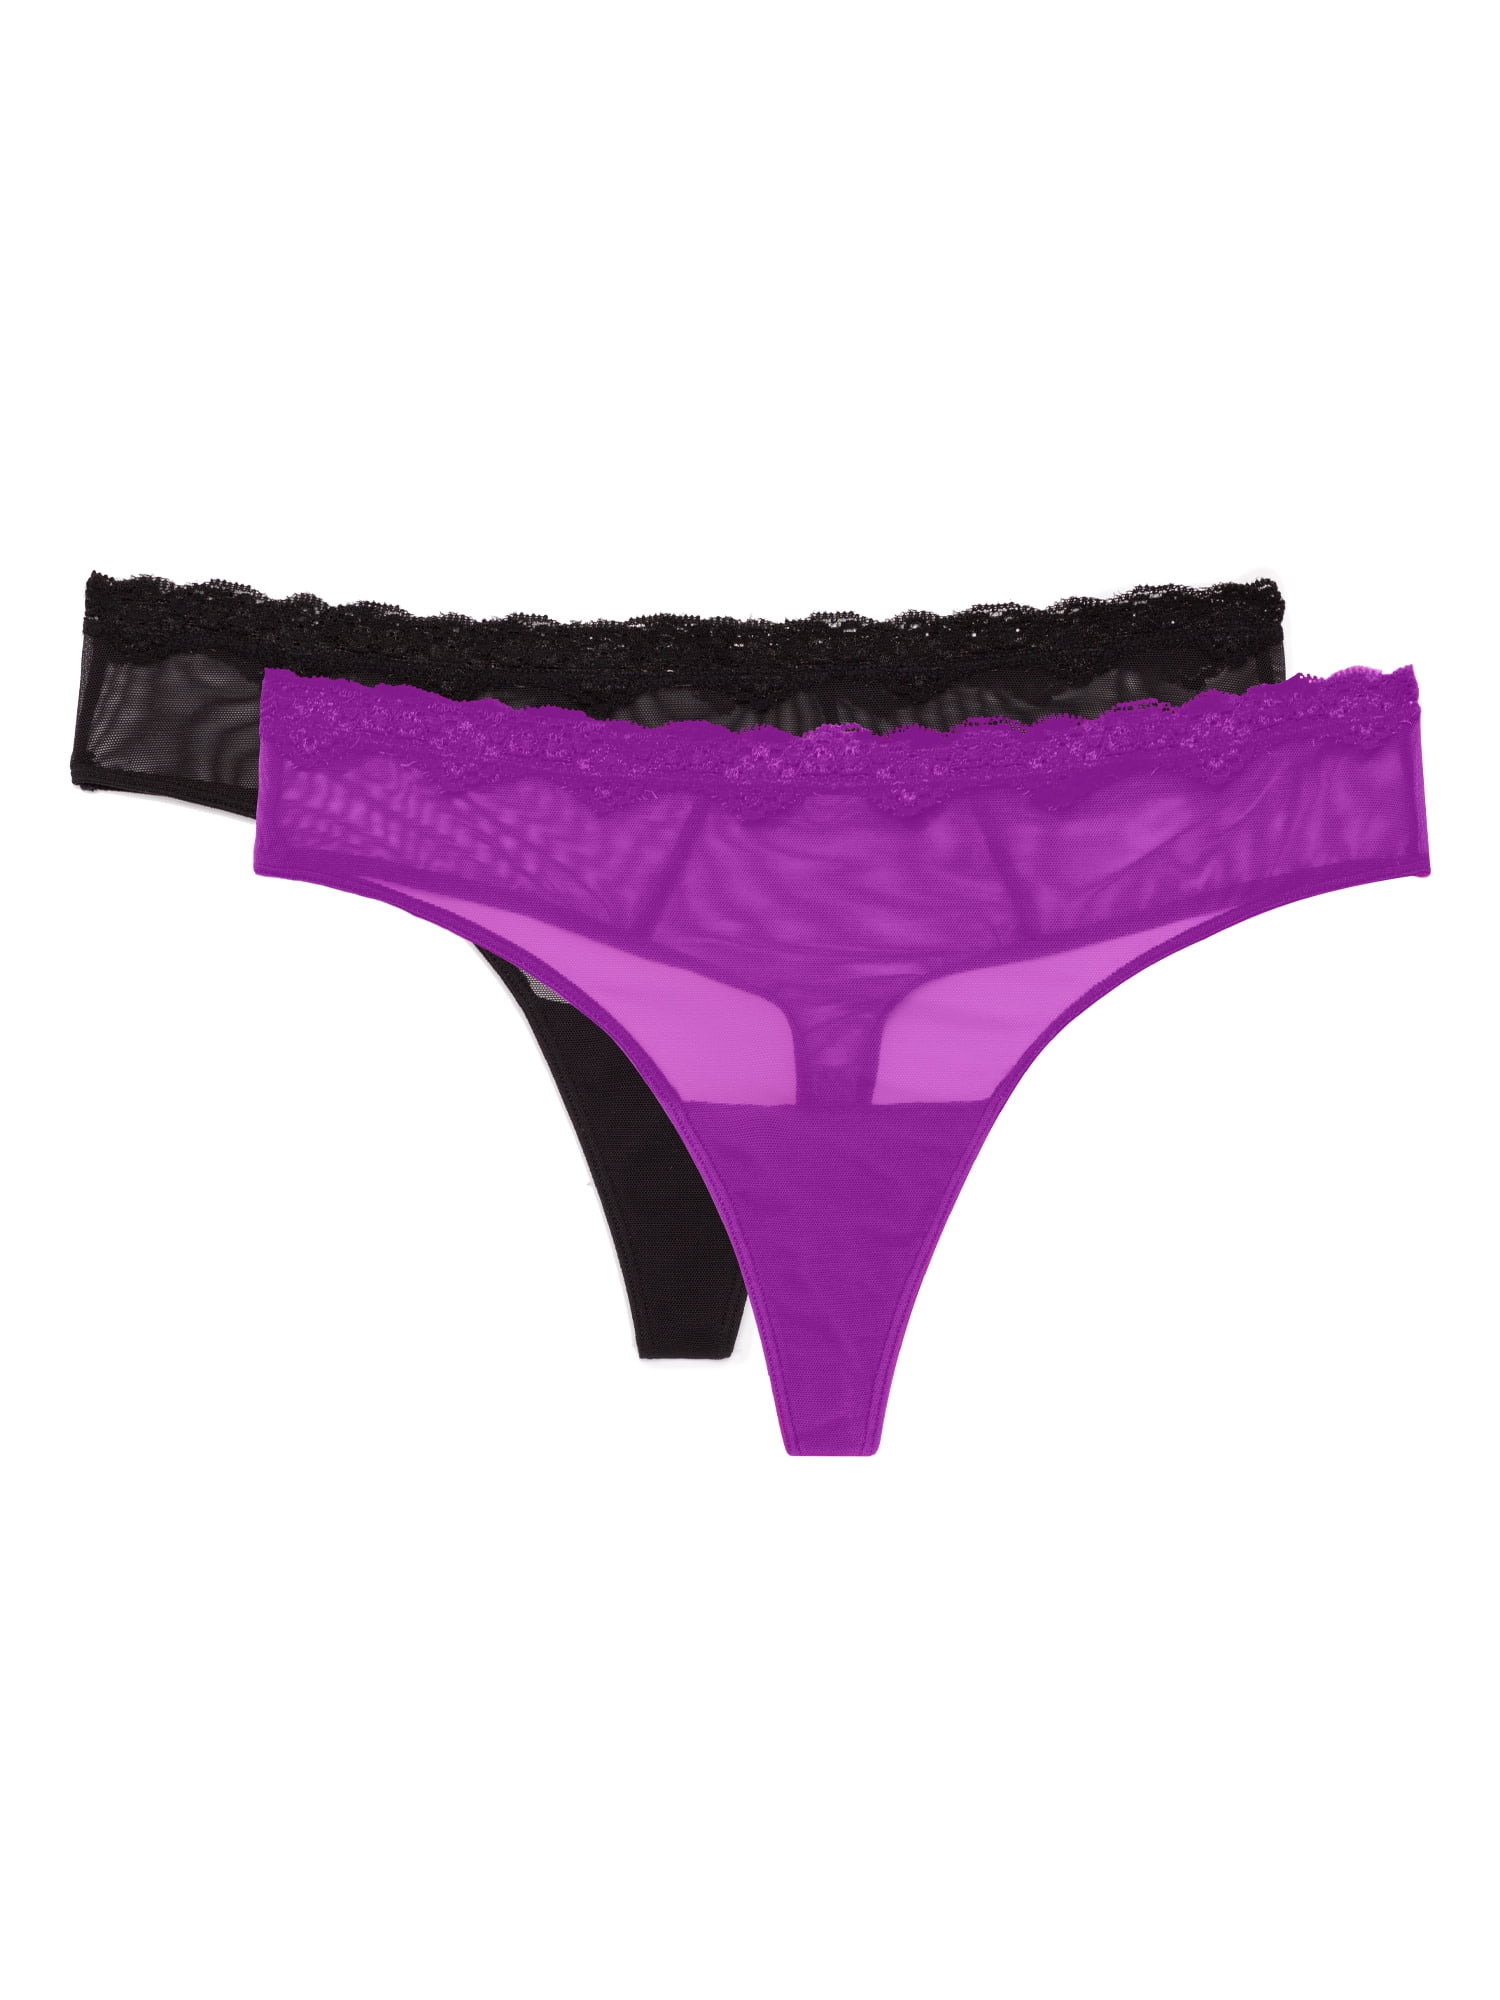 FLIPCHARGE classic Hot Purple colour Thong panty for Women and